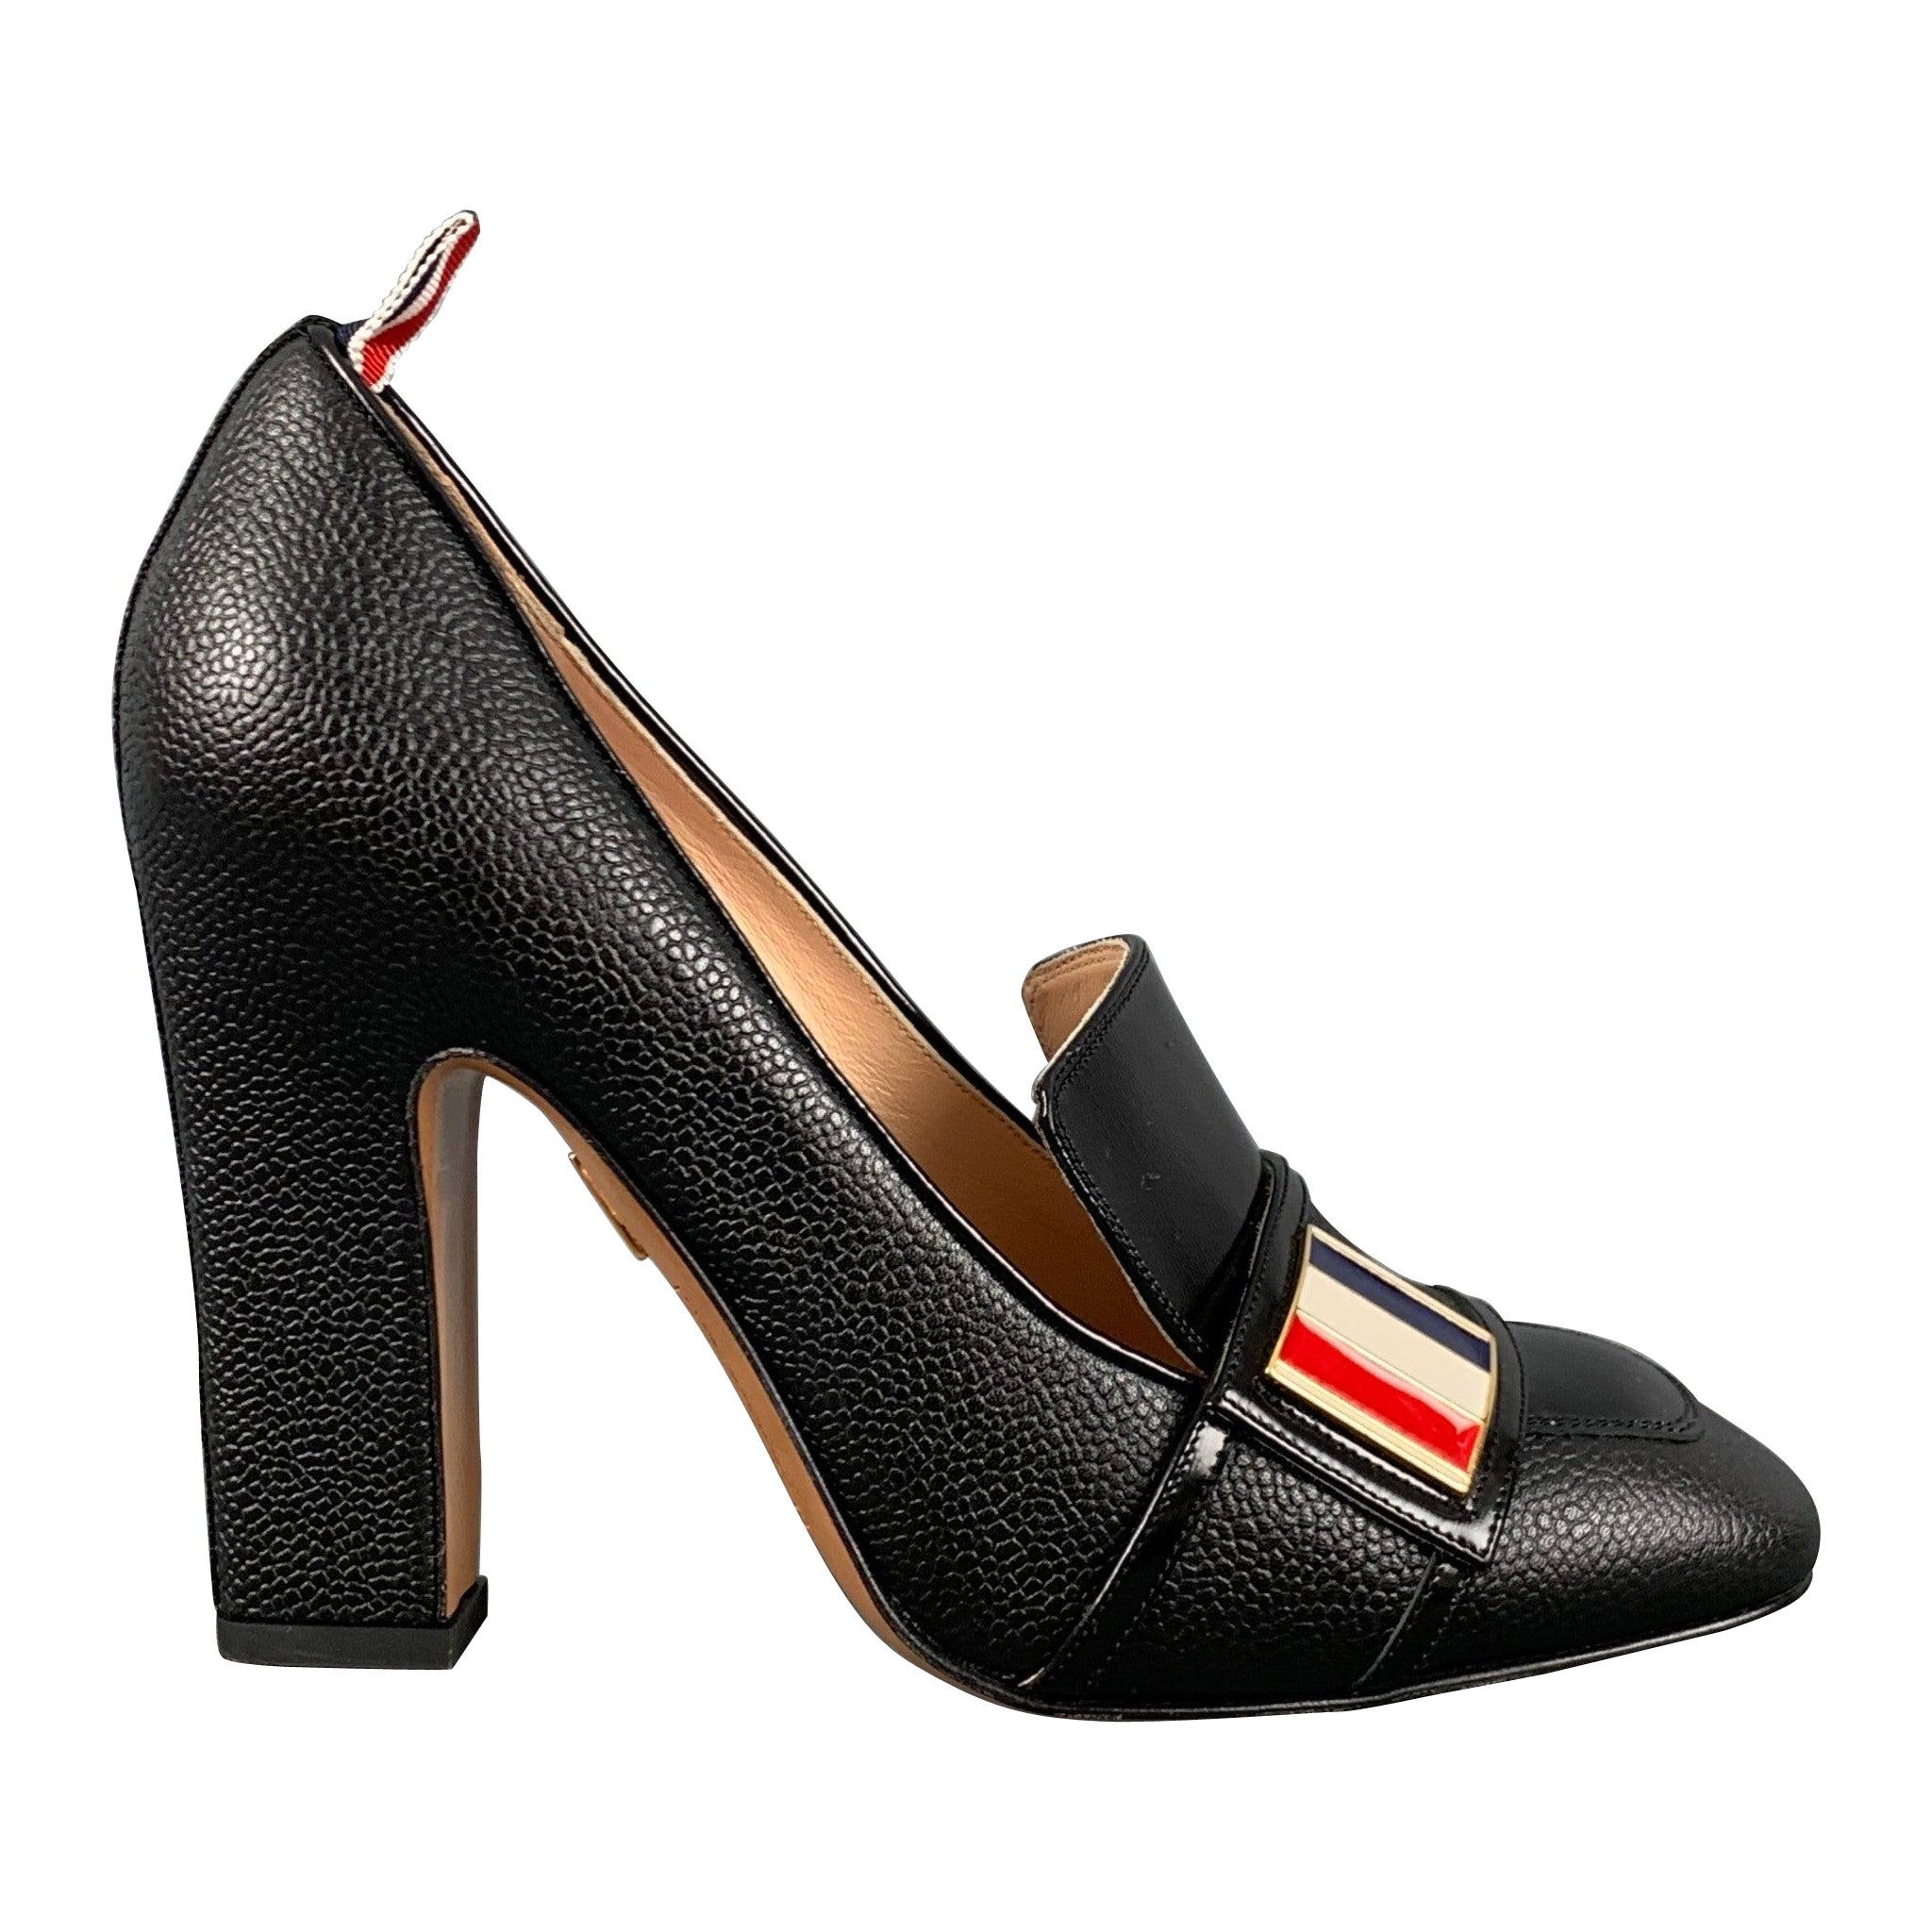 THOM BROWNE Size 8 Black Red & White Leather Mixed Materials Pebble Grain Pumps For Sale